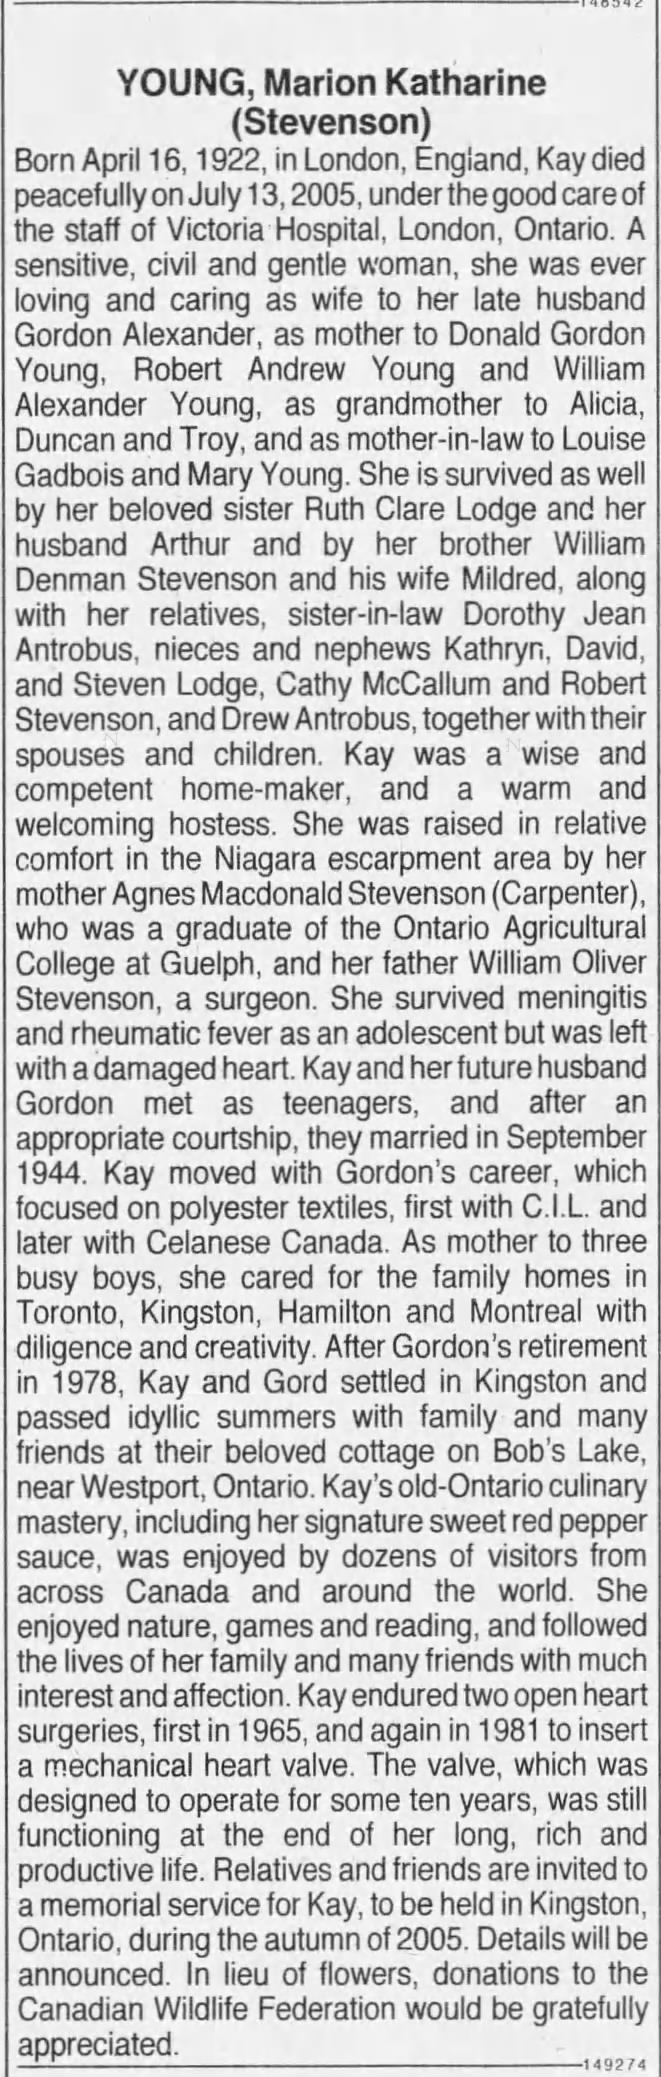 Obituary for Marion Katharine YOUNG, 1922-2005